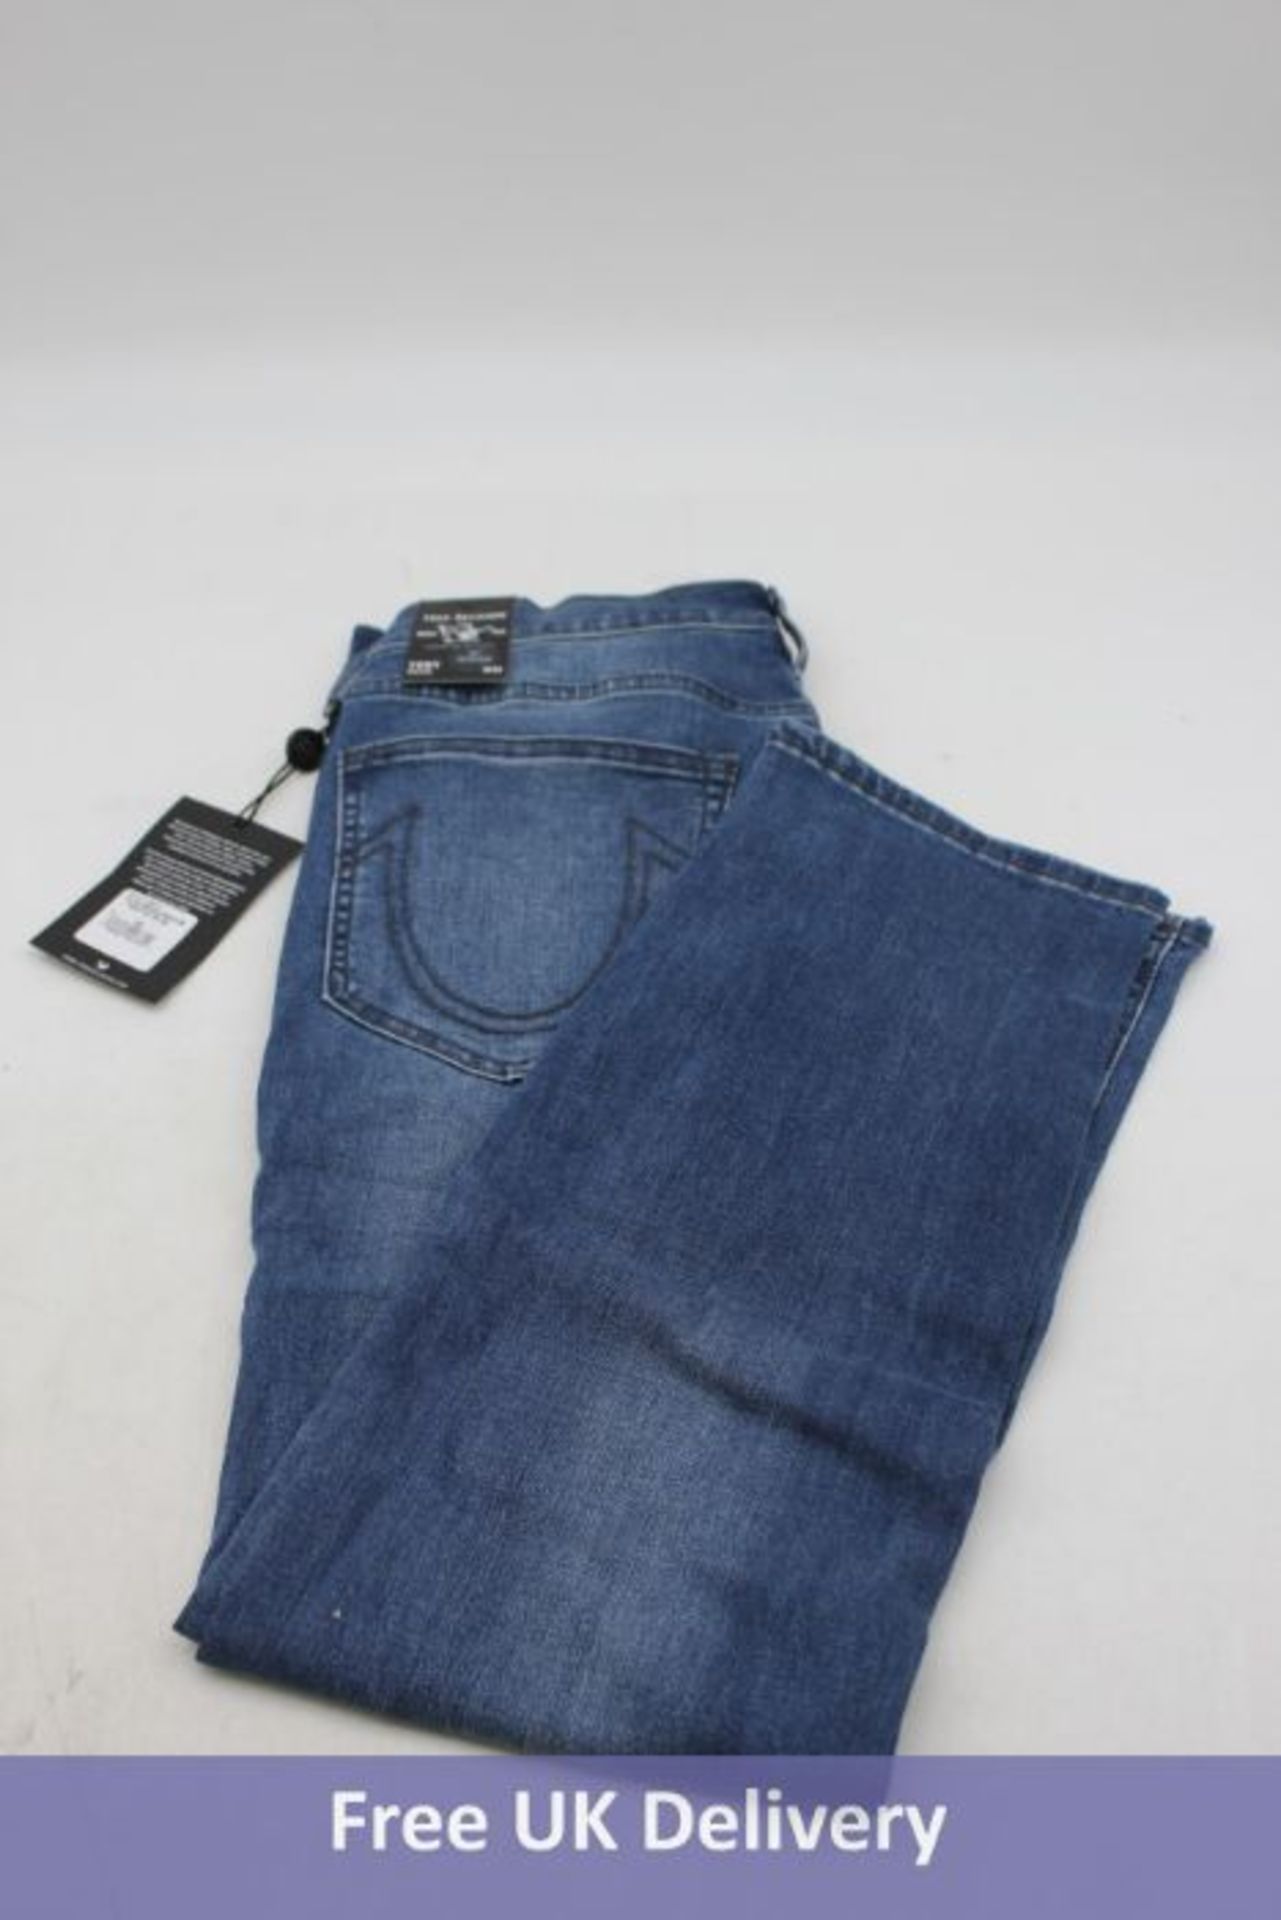 Two True Religion Men's Tony Skinny Jeans Medium Disruption, Size 32, Brand New With Tag - Image 2 of 2